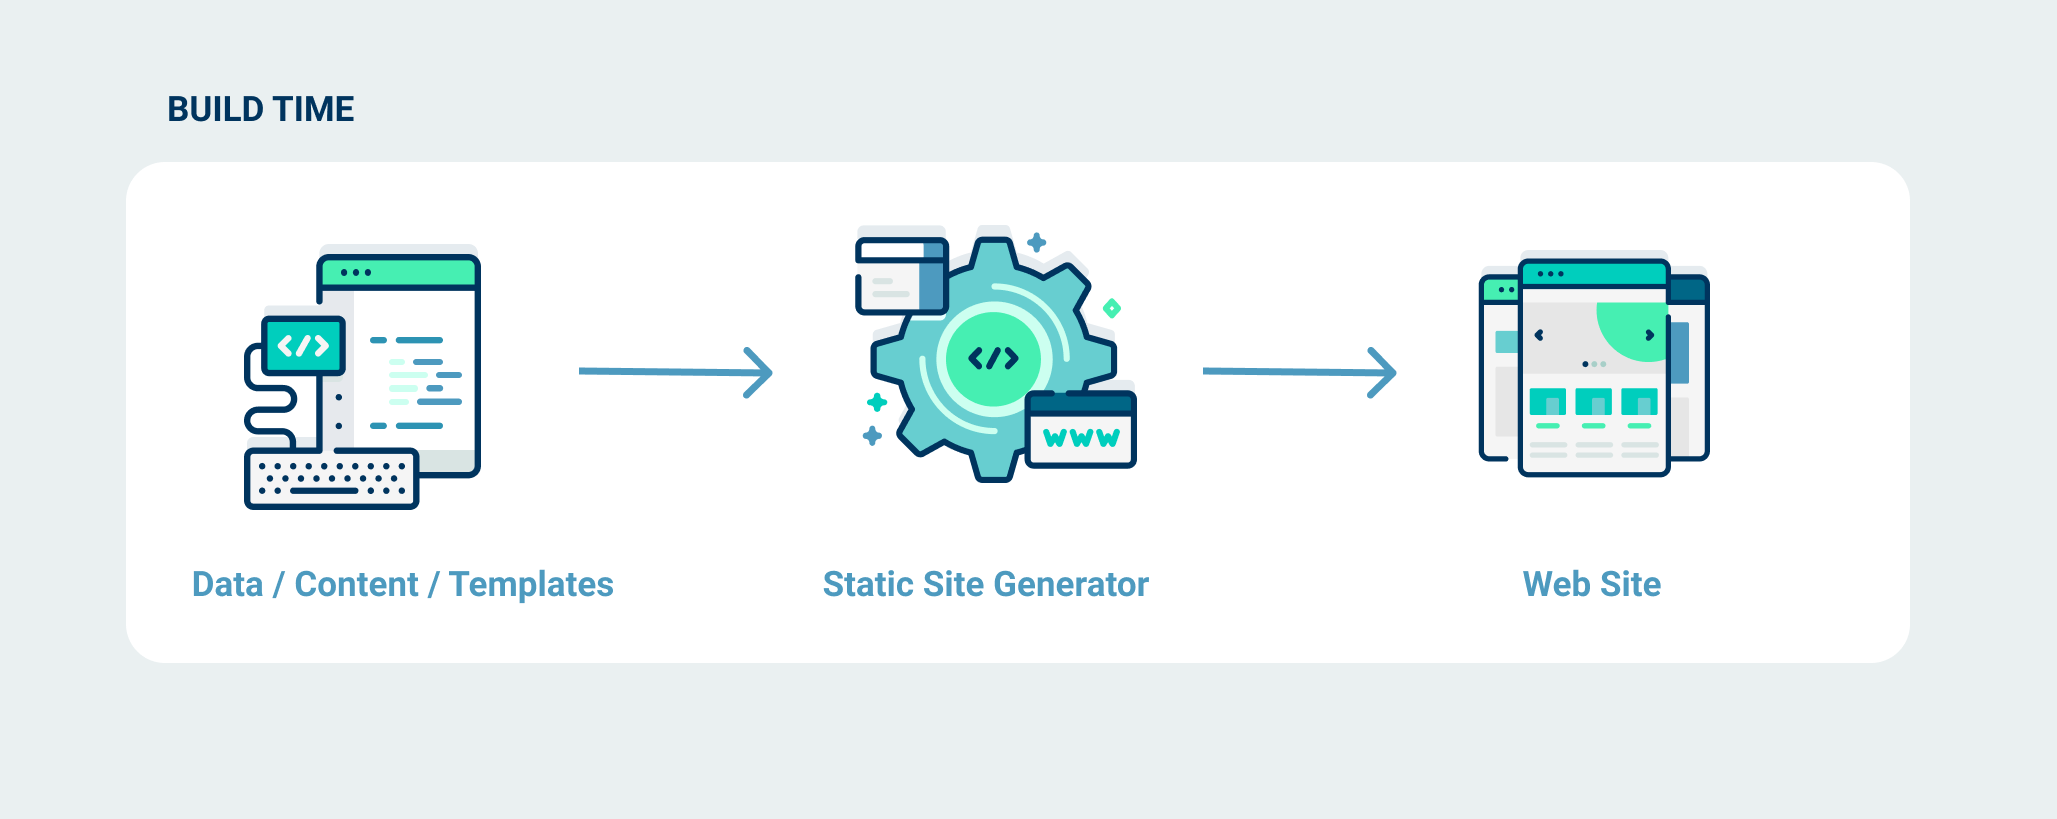 Diagram static site generator turning assets into a website at build time